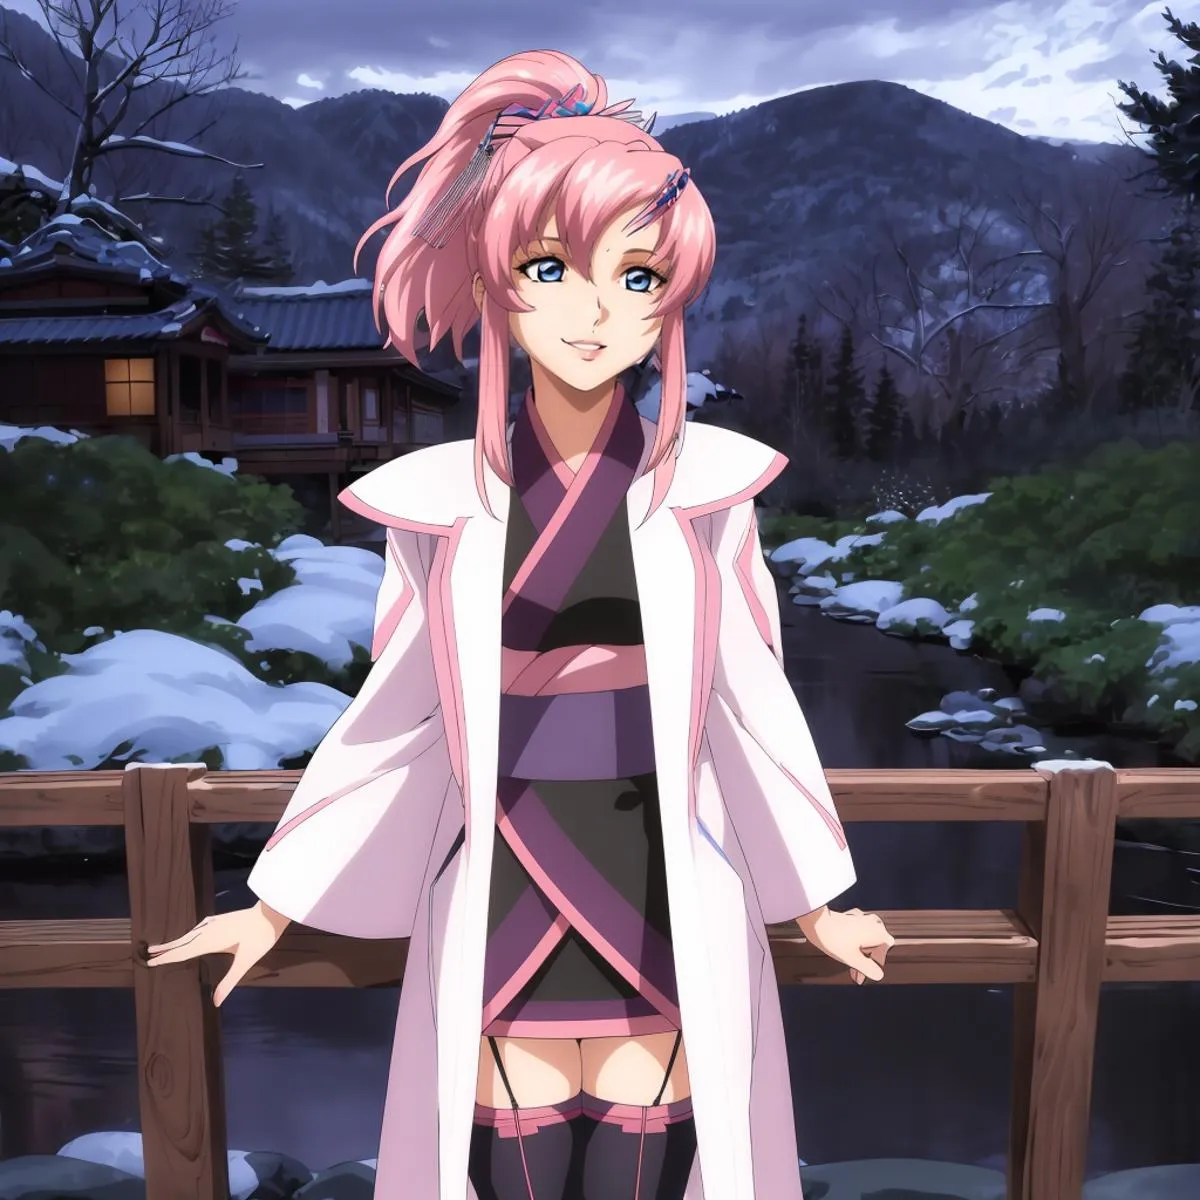 Anime girl with pink hair wearing a white and pink outfit, standing on a wooden bridge with a snowy winter landscape in the background, generated by AI using Stable Diffusion.